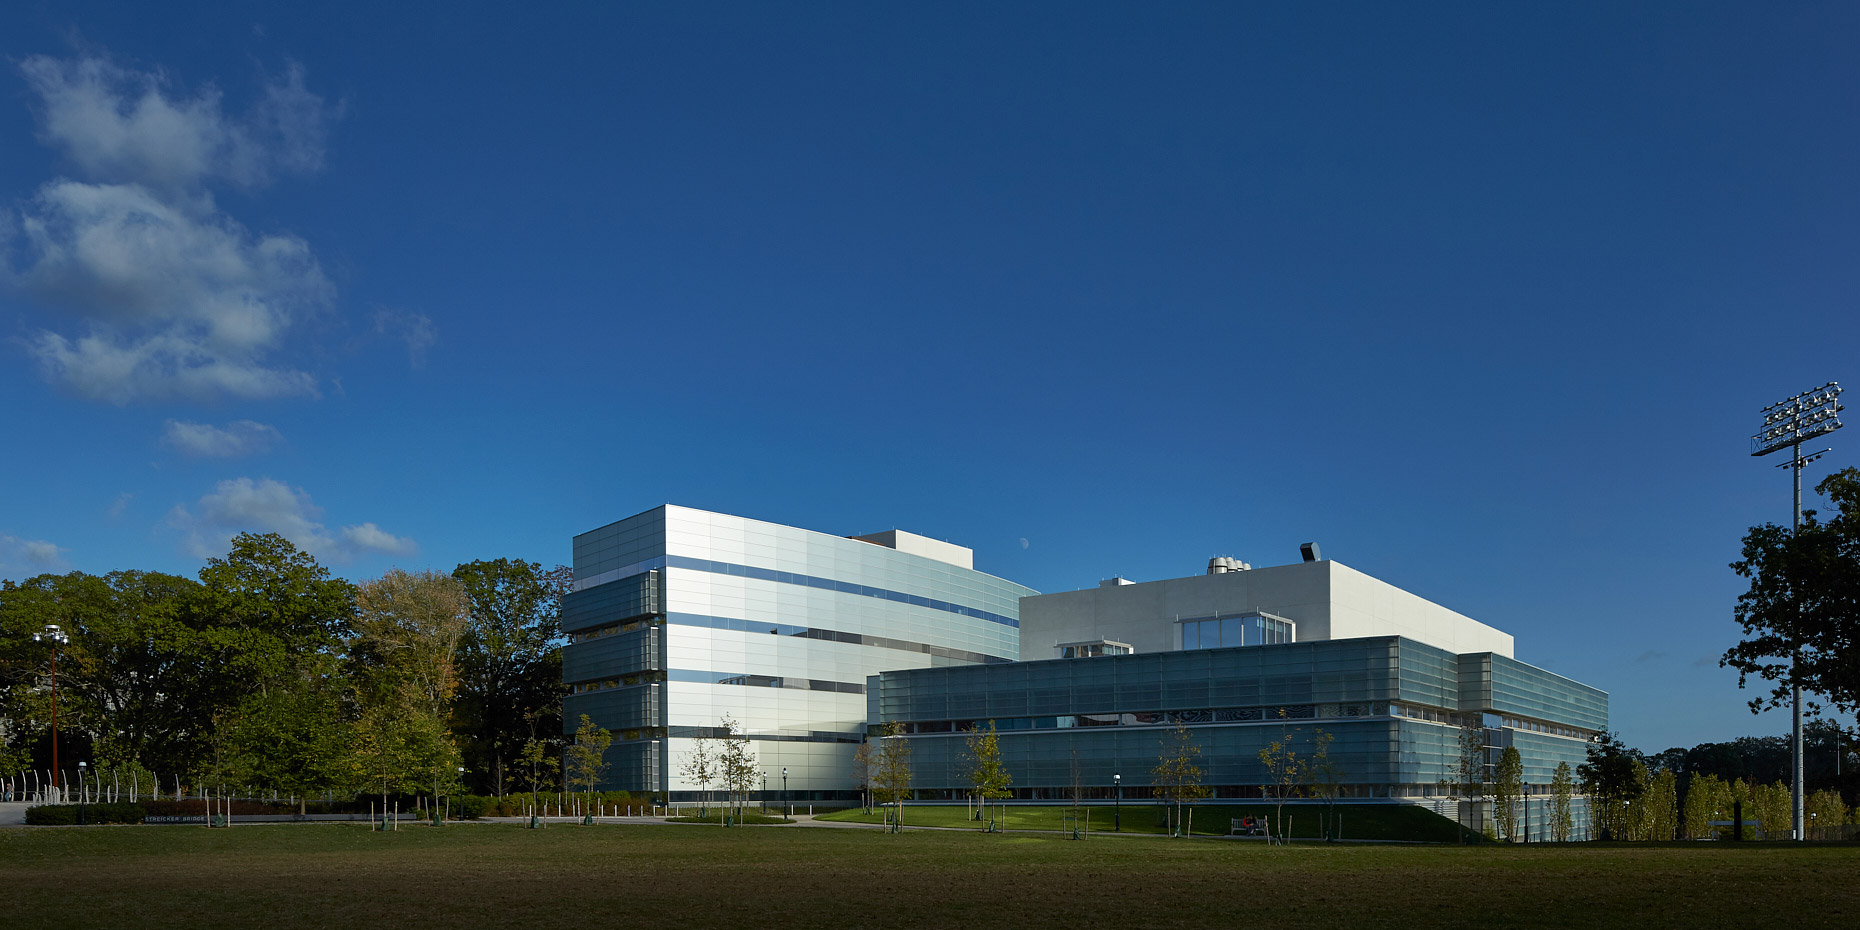 Peretsman Scully Hall and the Princeton Neuroscience Institute